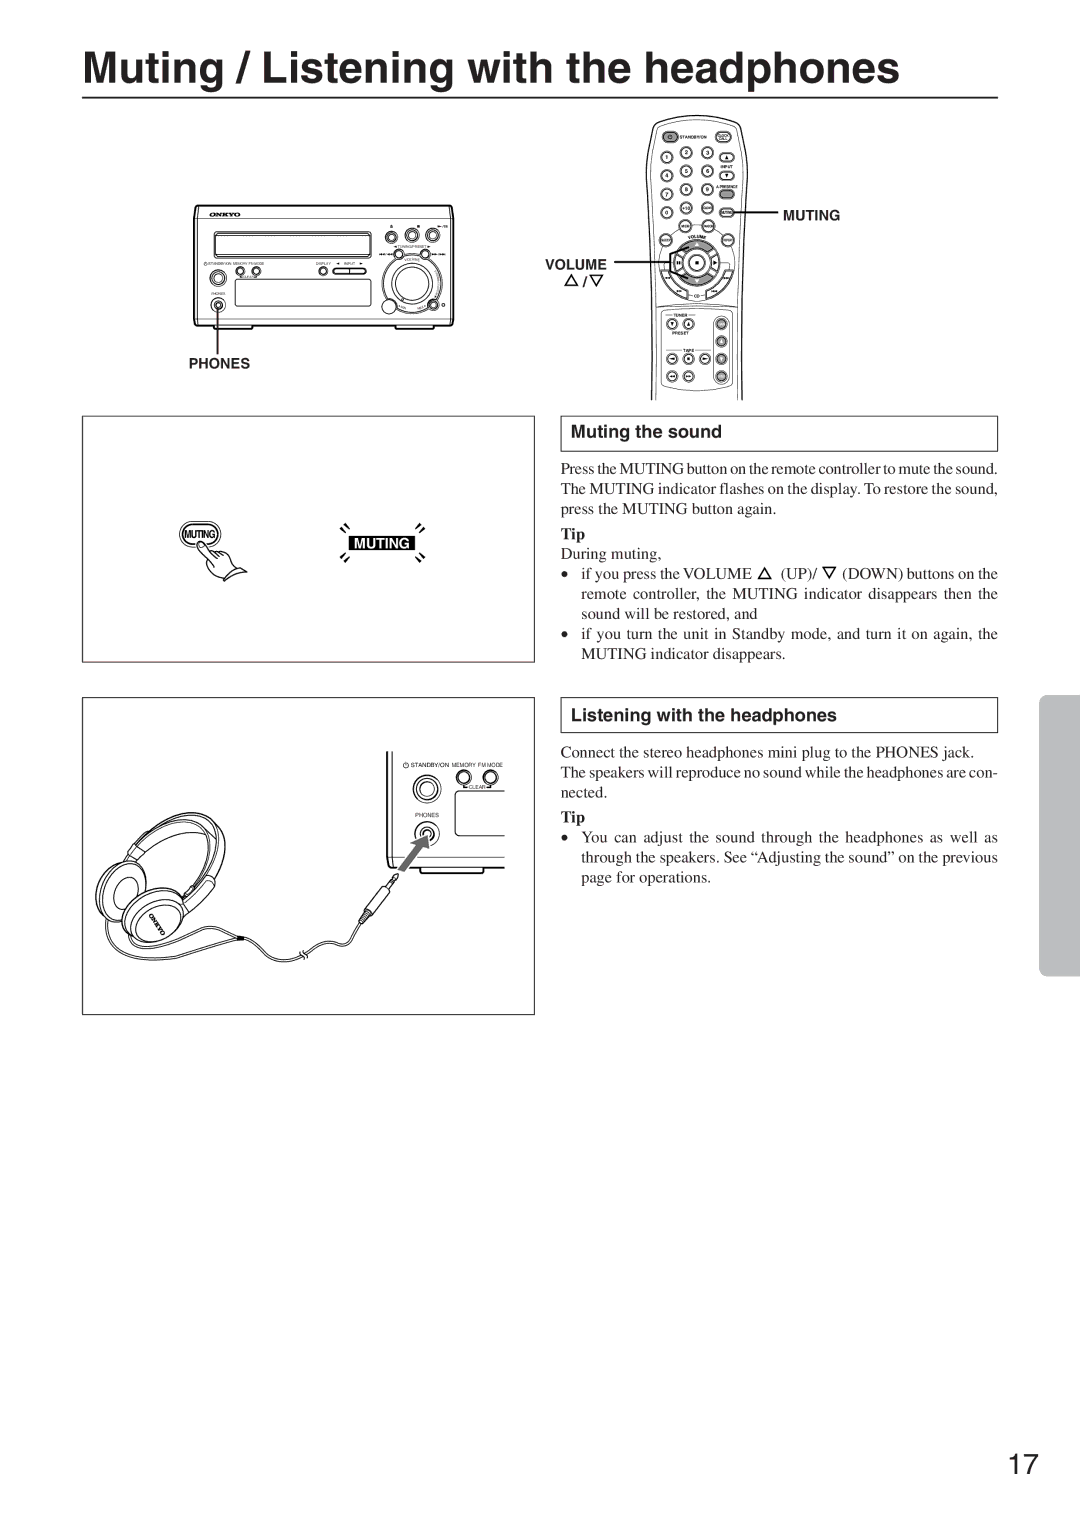 Onkyo CR-305FX instruction manual Muting / Listening with the headphones, Muting the sound, Tip 